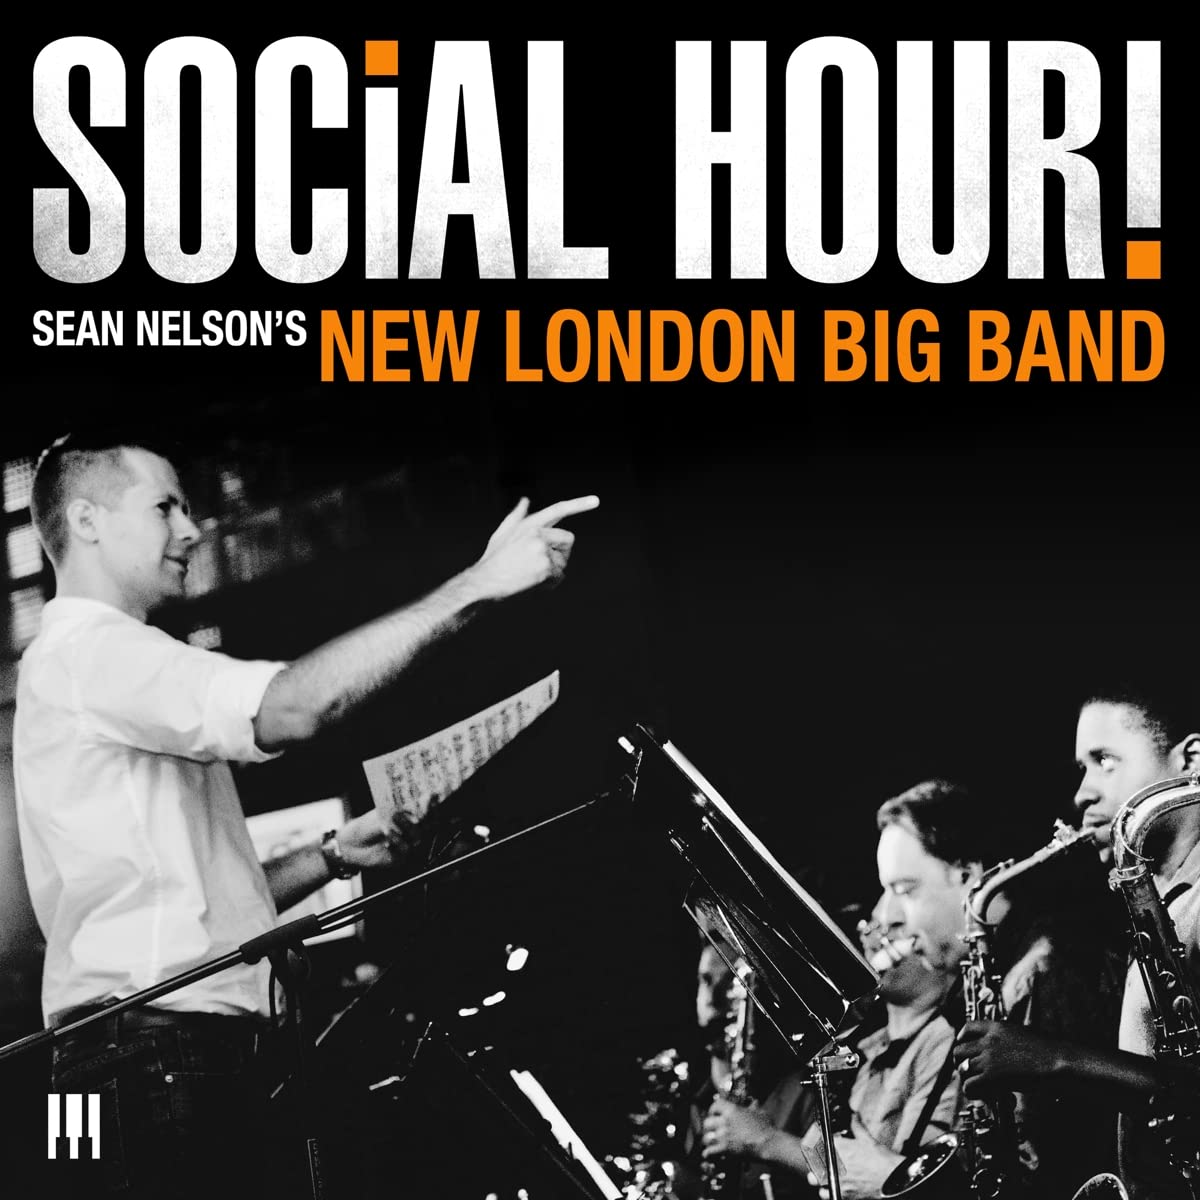 SEAN NELSONS NEW LONDON BIG BAND - Social Hour! cover 